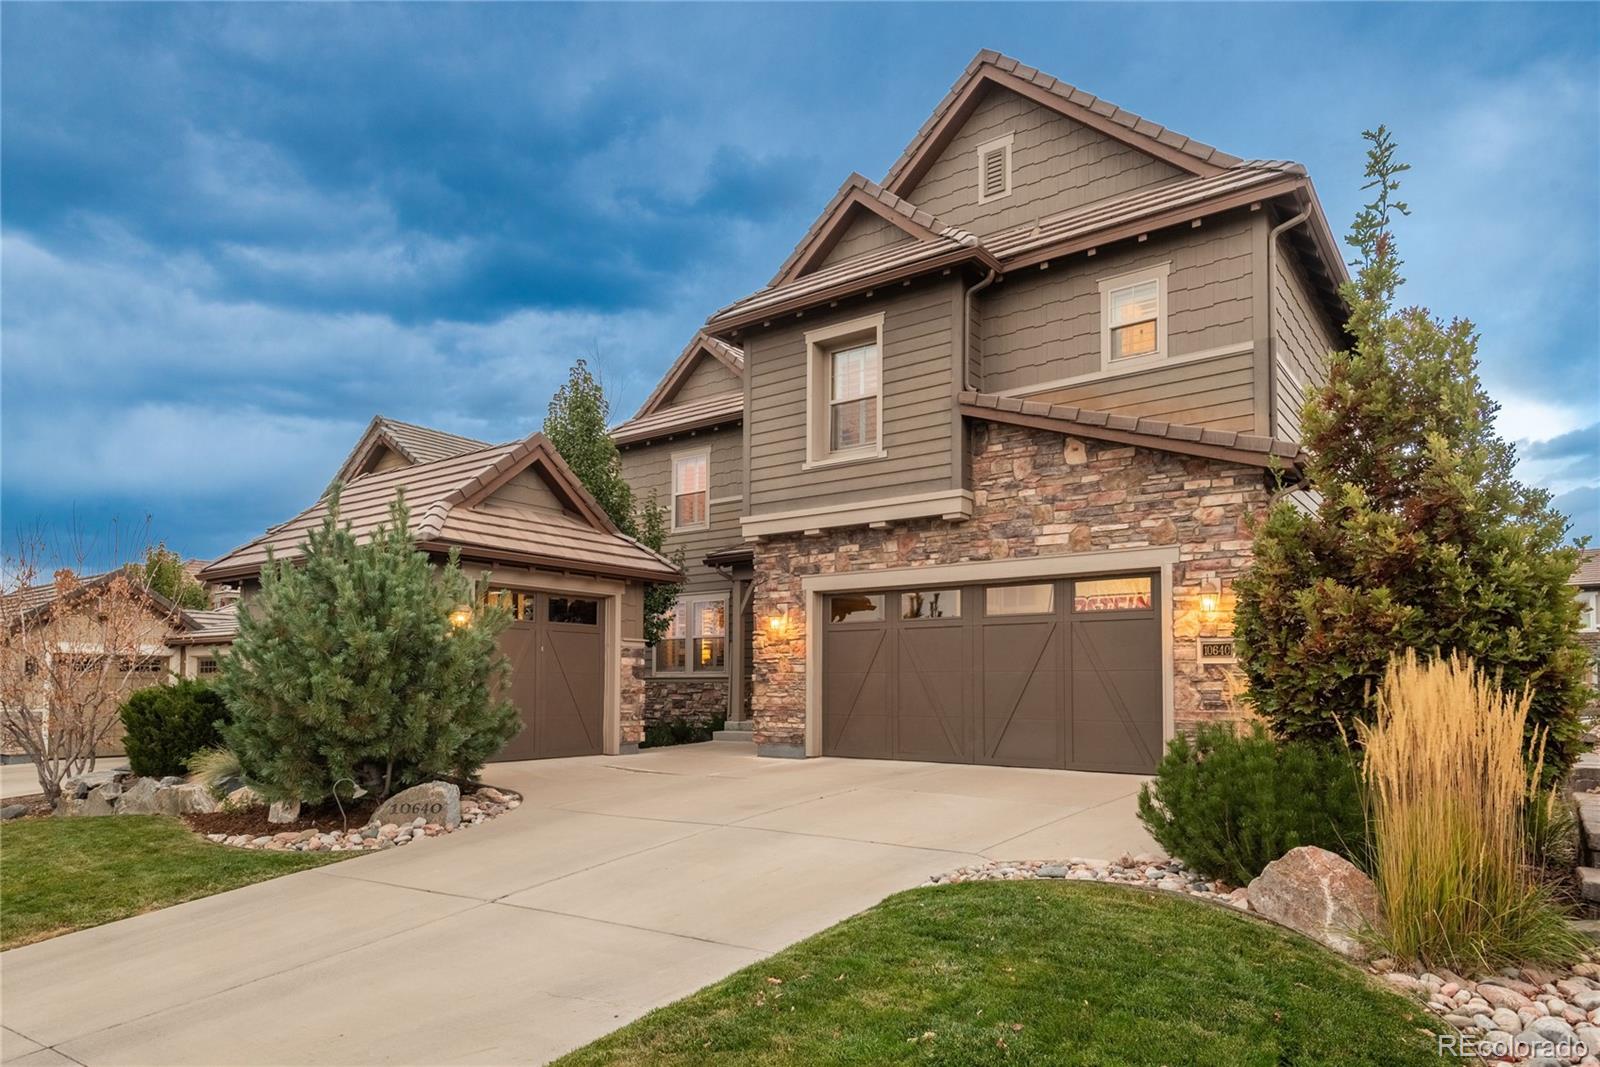 10640  Star Thistle Court, highlands ranch MLS: 8745714 Beds: 4 Baths: 4 Price: $1,375,000